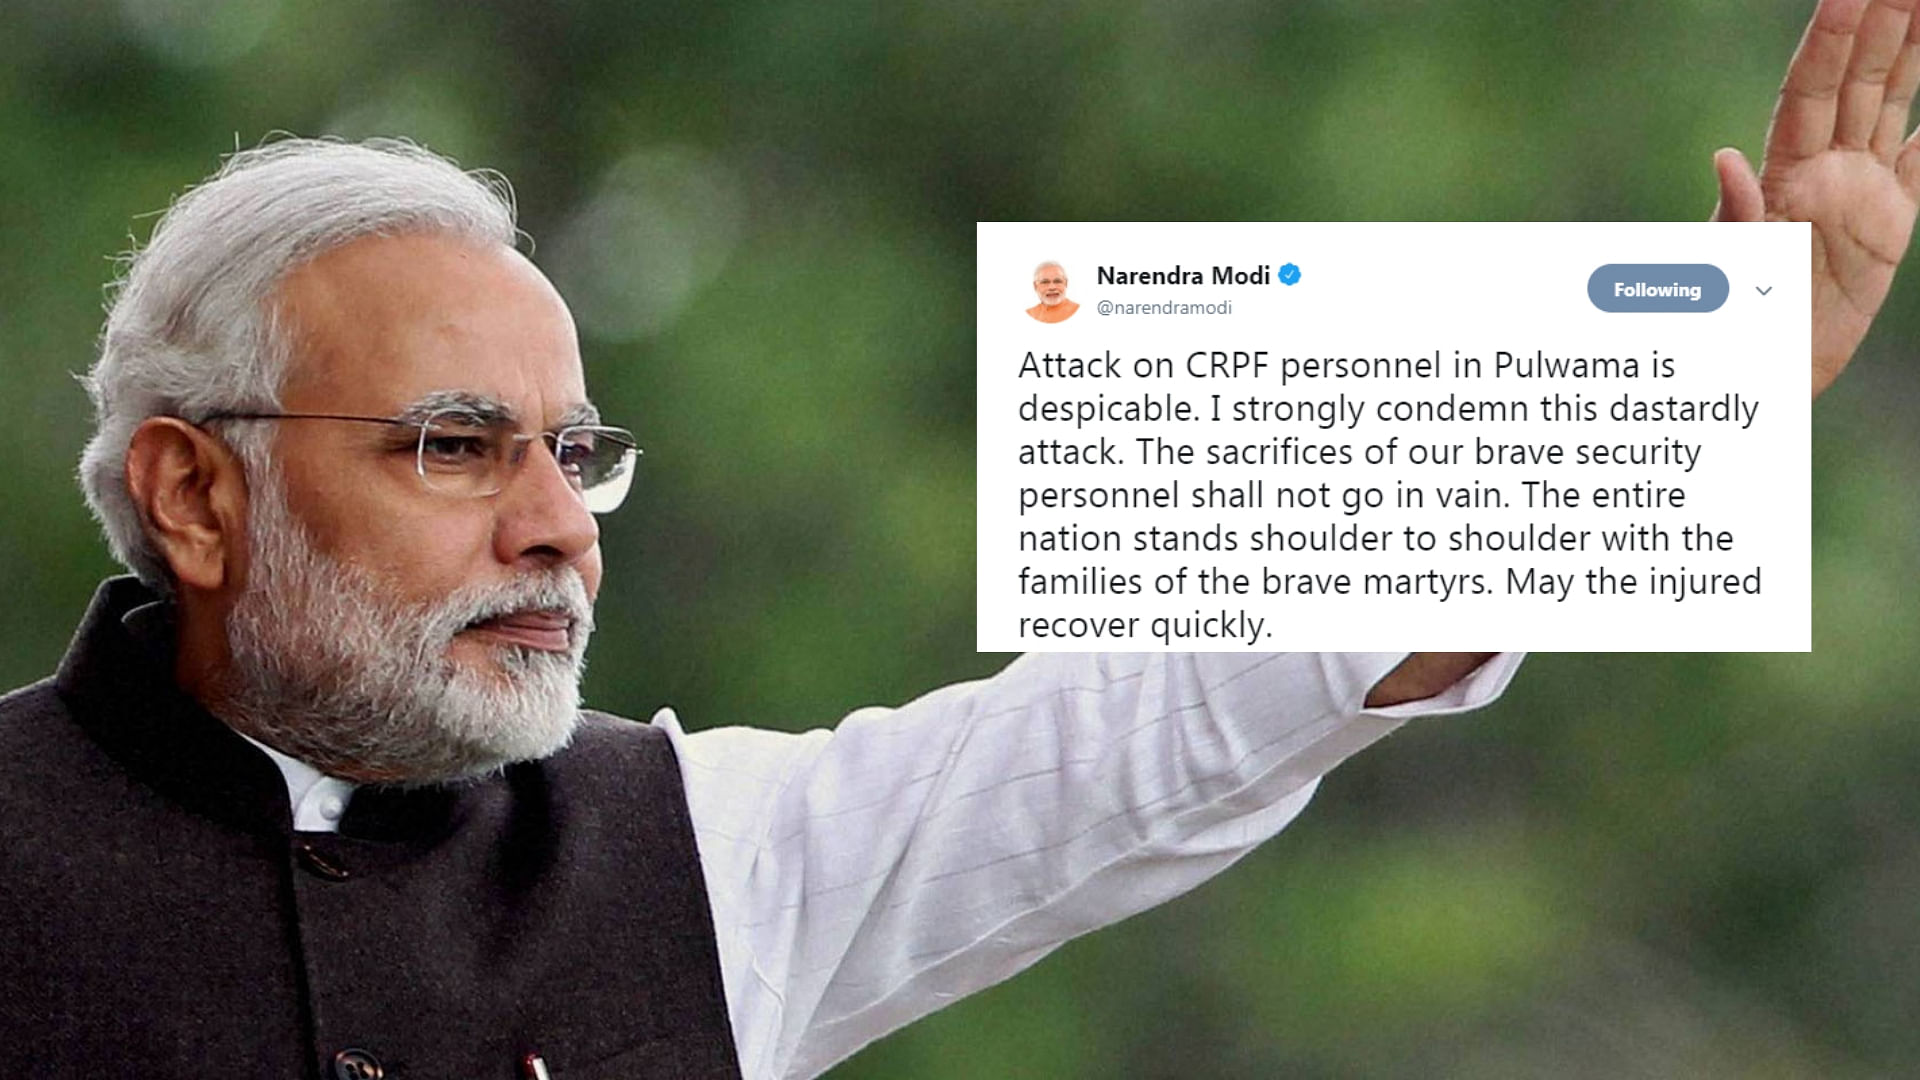 Prime Minister Narendra Modi reacts to the IED attack on CRPF jawans in Awantipora, Pulwama in Jammu and Kashmir.